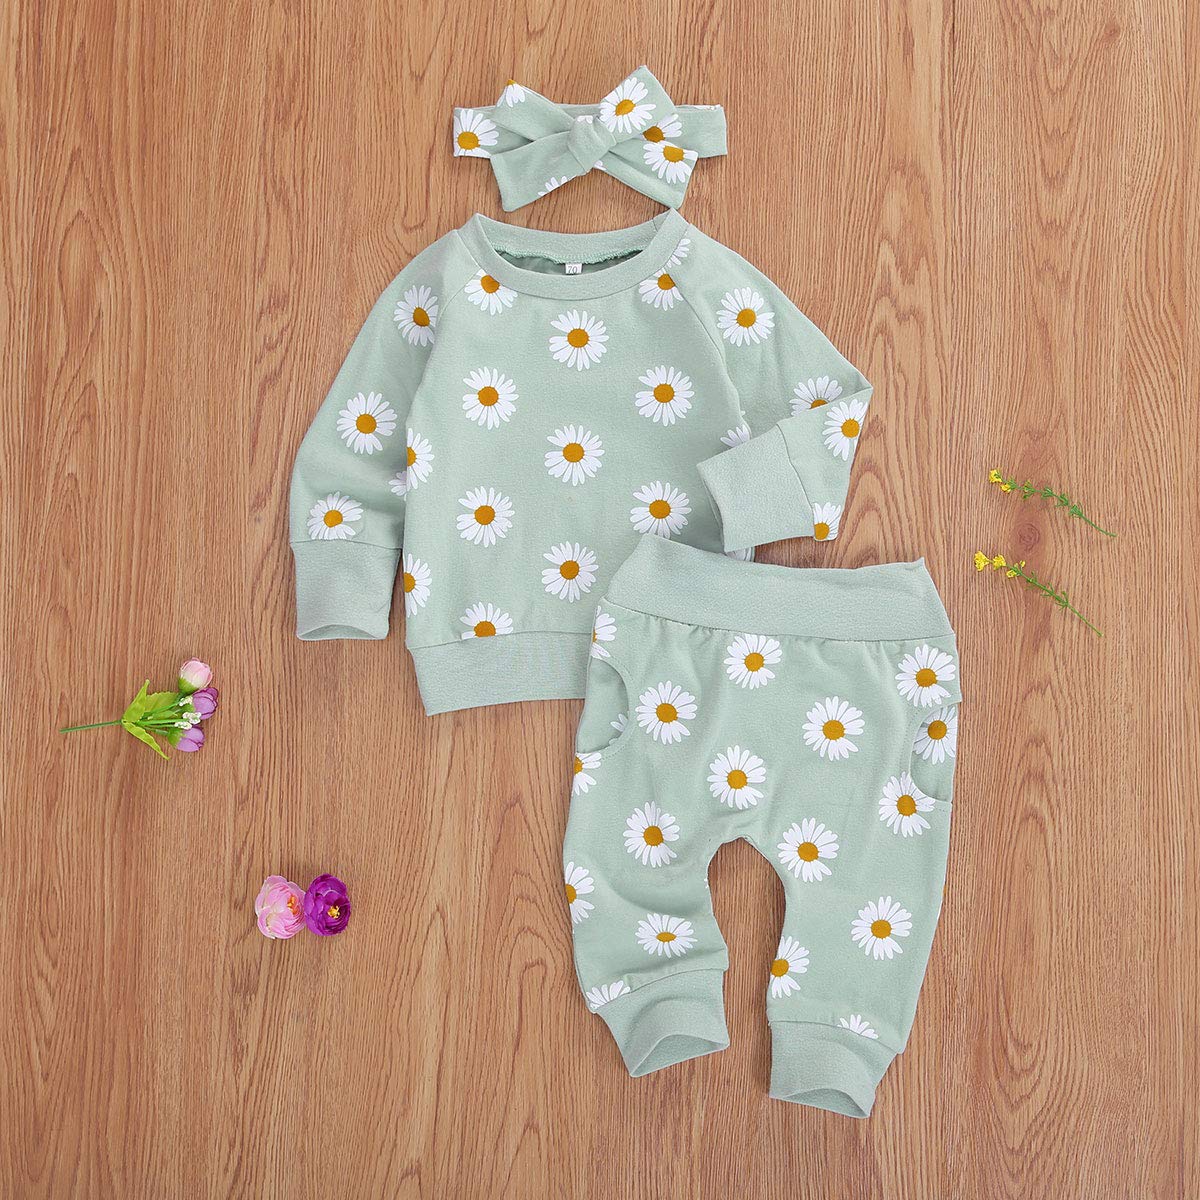 Newborn Infant Baby Girl Clothes Set Long Sleeve Sweatshirts Tops Pants Outfits Clothing Gifts 3 6 9 12 18 24 Months